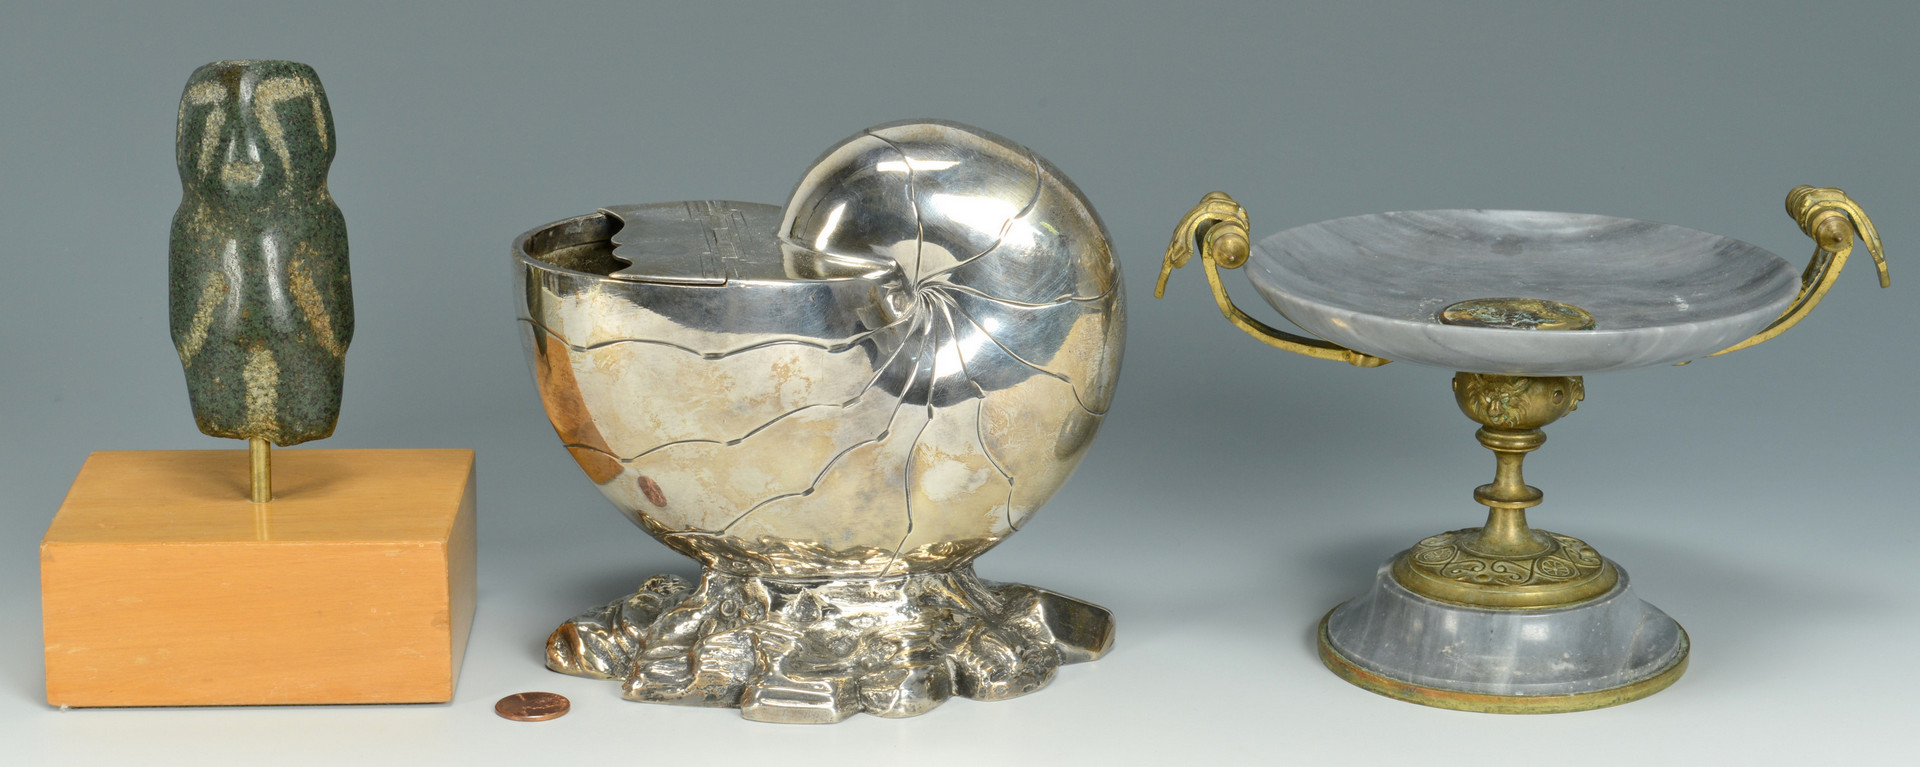 Lot 533: 3 Decorative Items: Shell, compote & sculpture